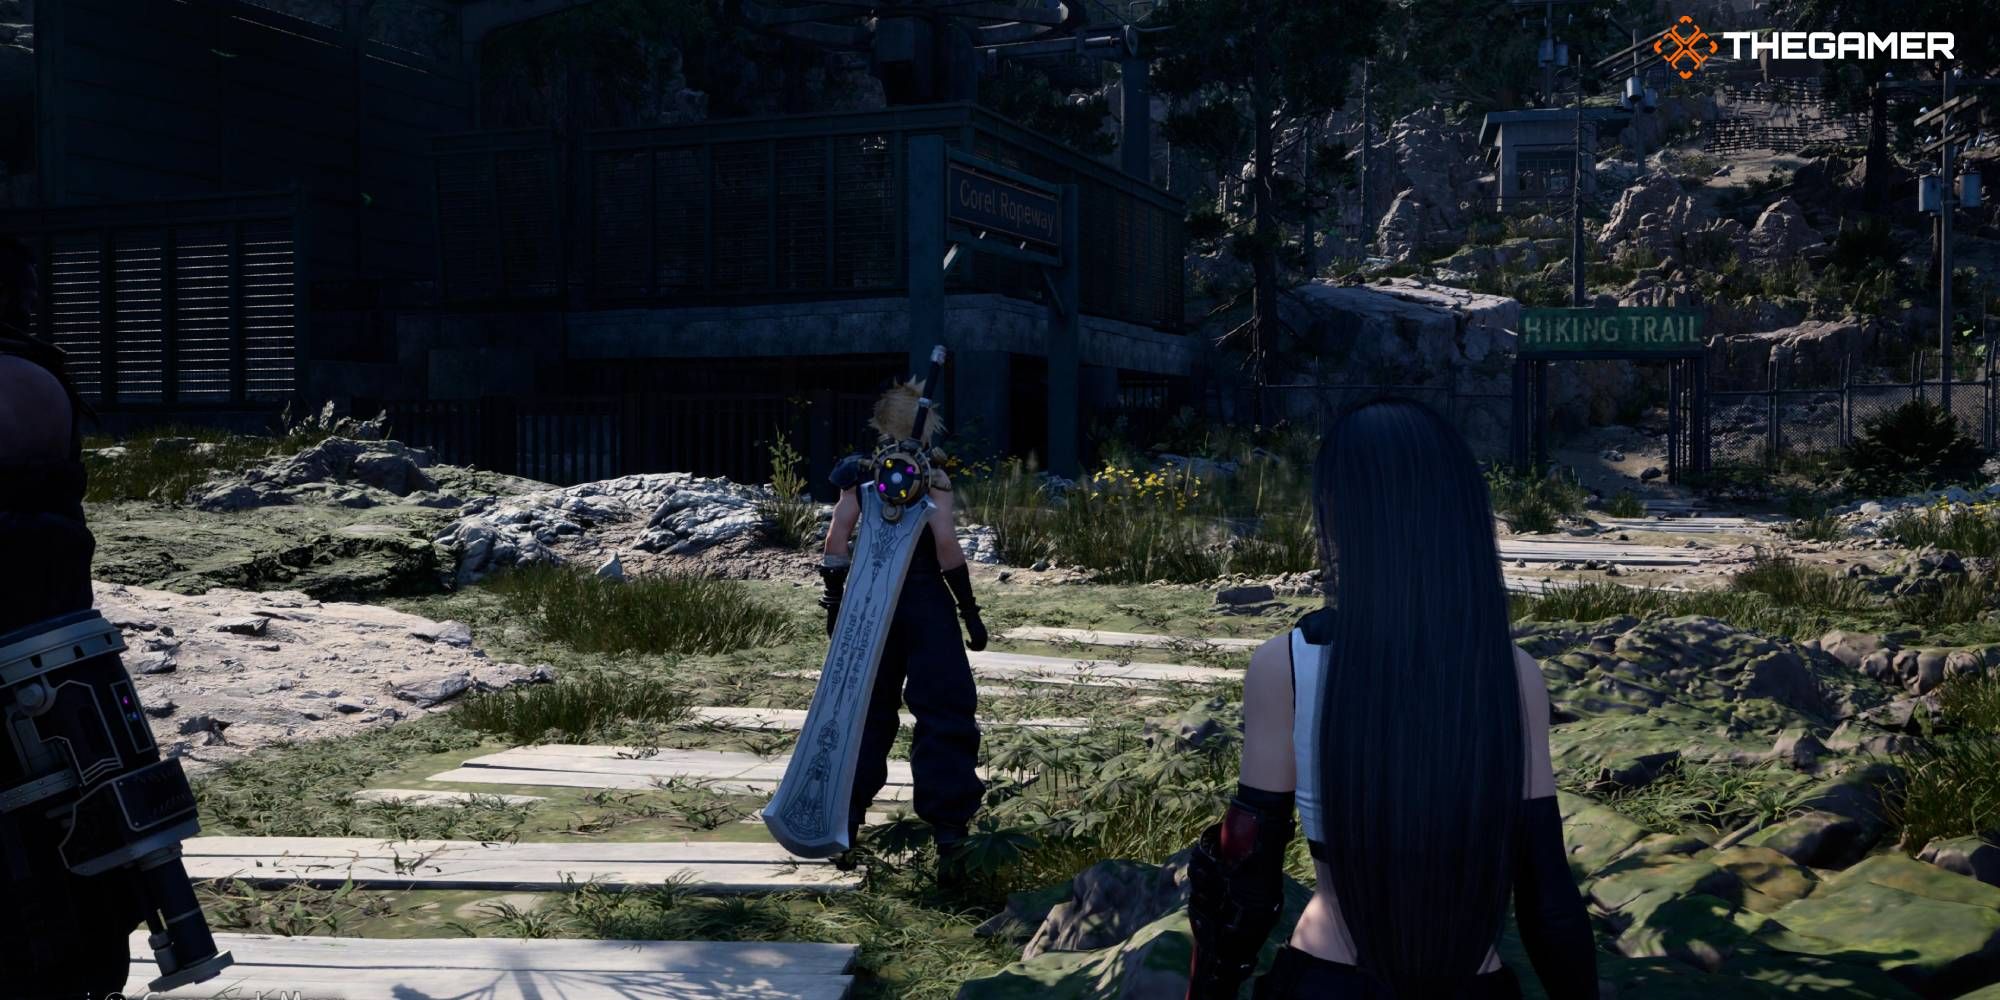 Cloud, Tifa, and Barret approach Mount Corel's hiking trail signage in FF7 Rebirth